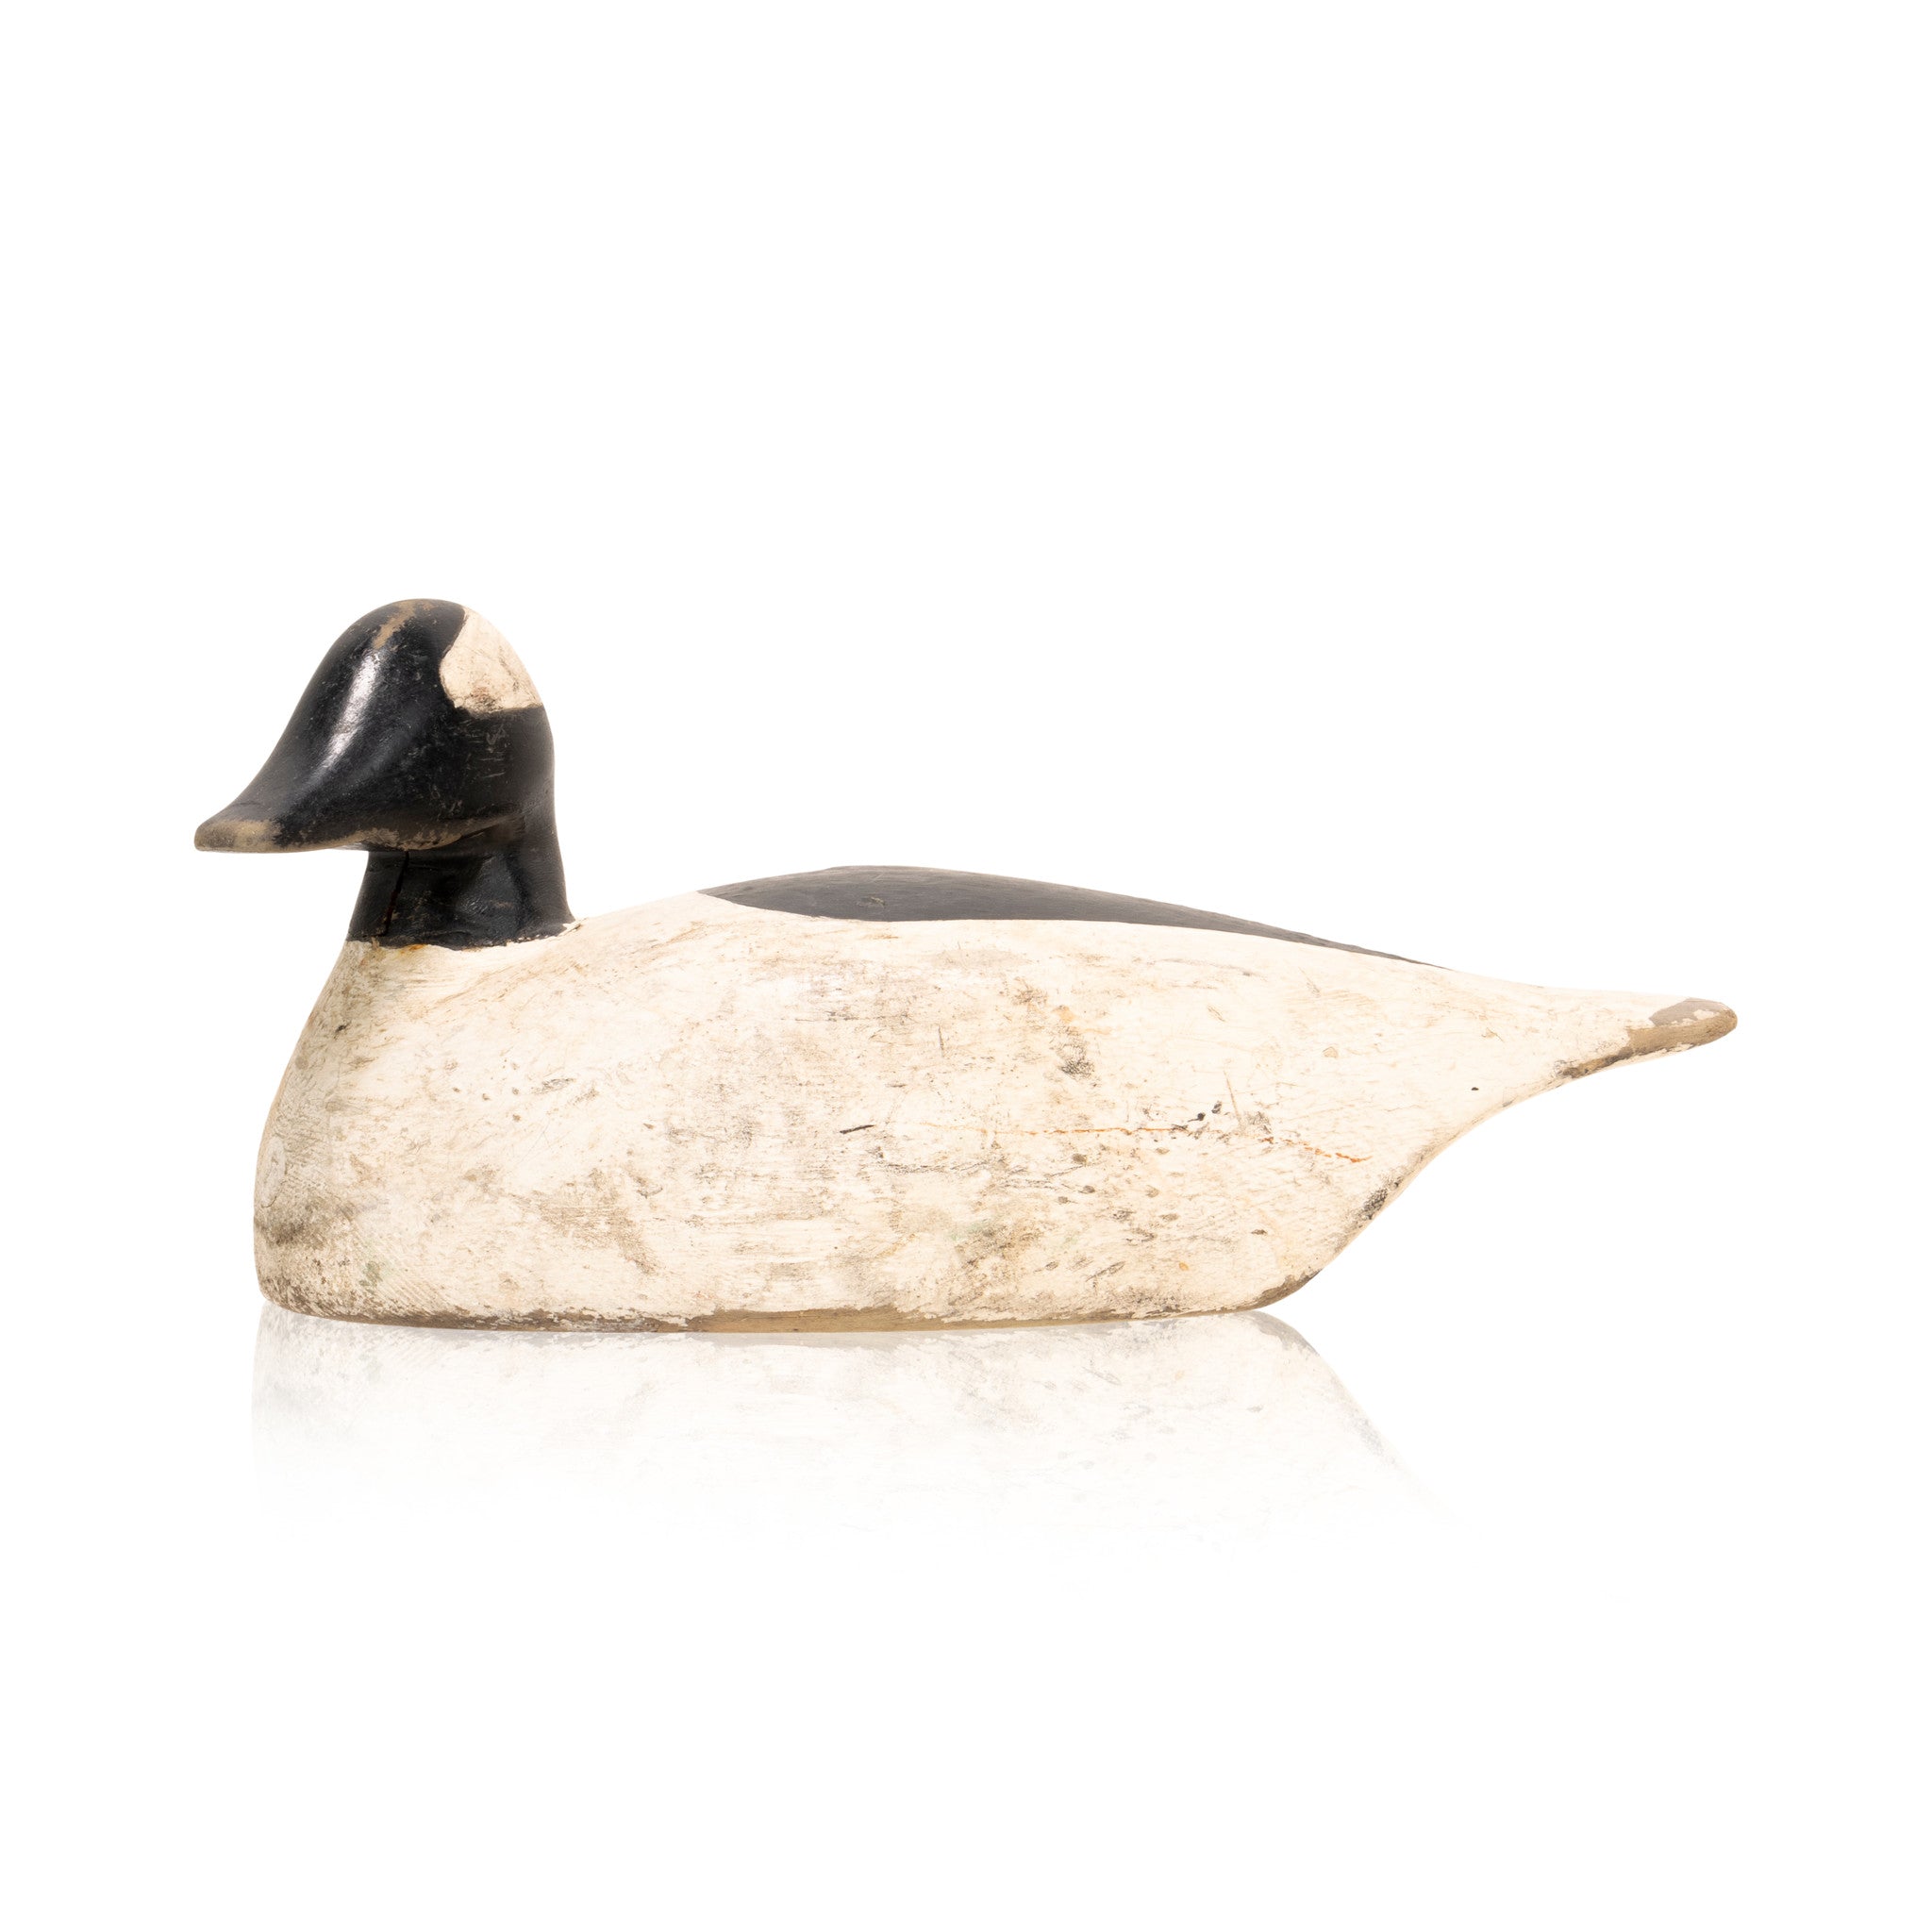 Adam Marks Butterball Decoy, Sporting Goods, Hunting, Waterfowl Decoy